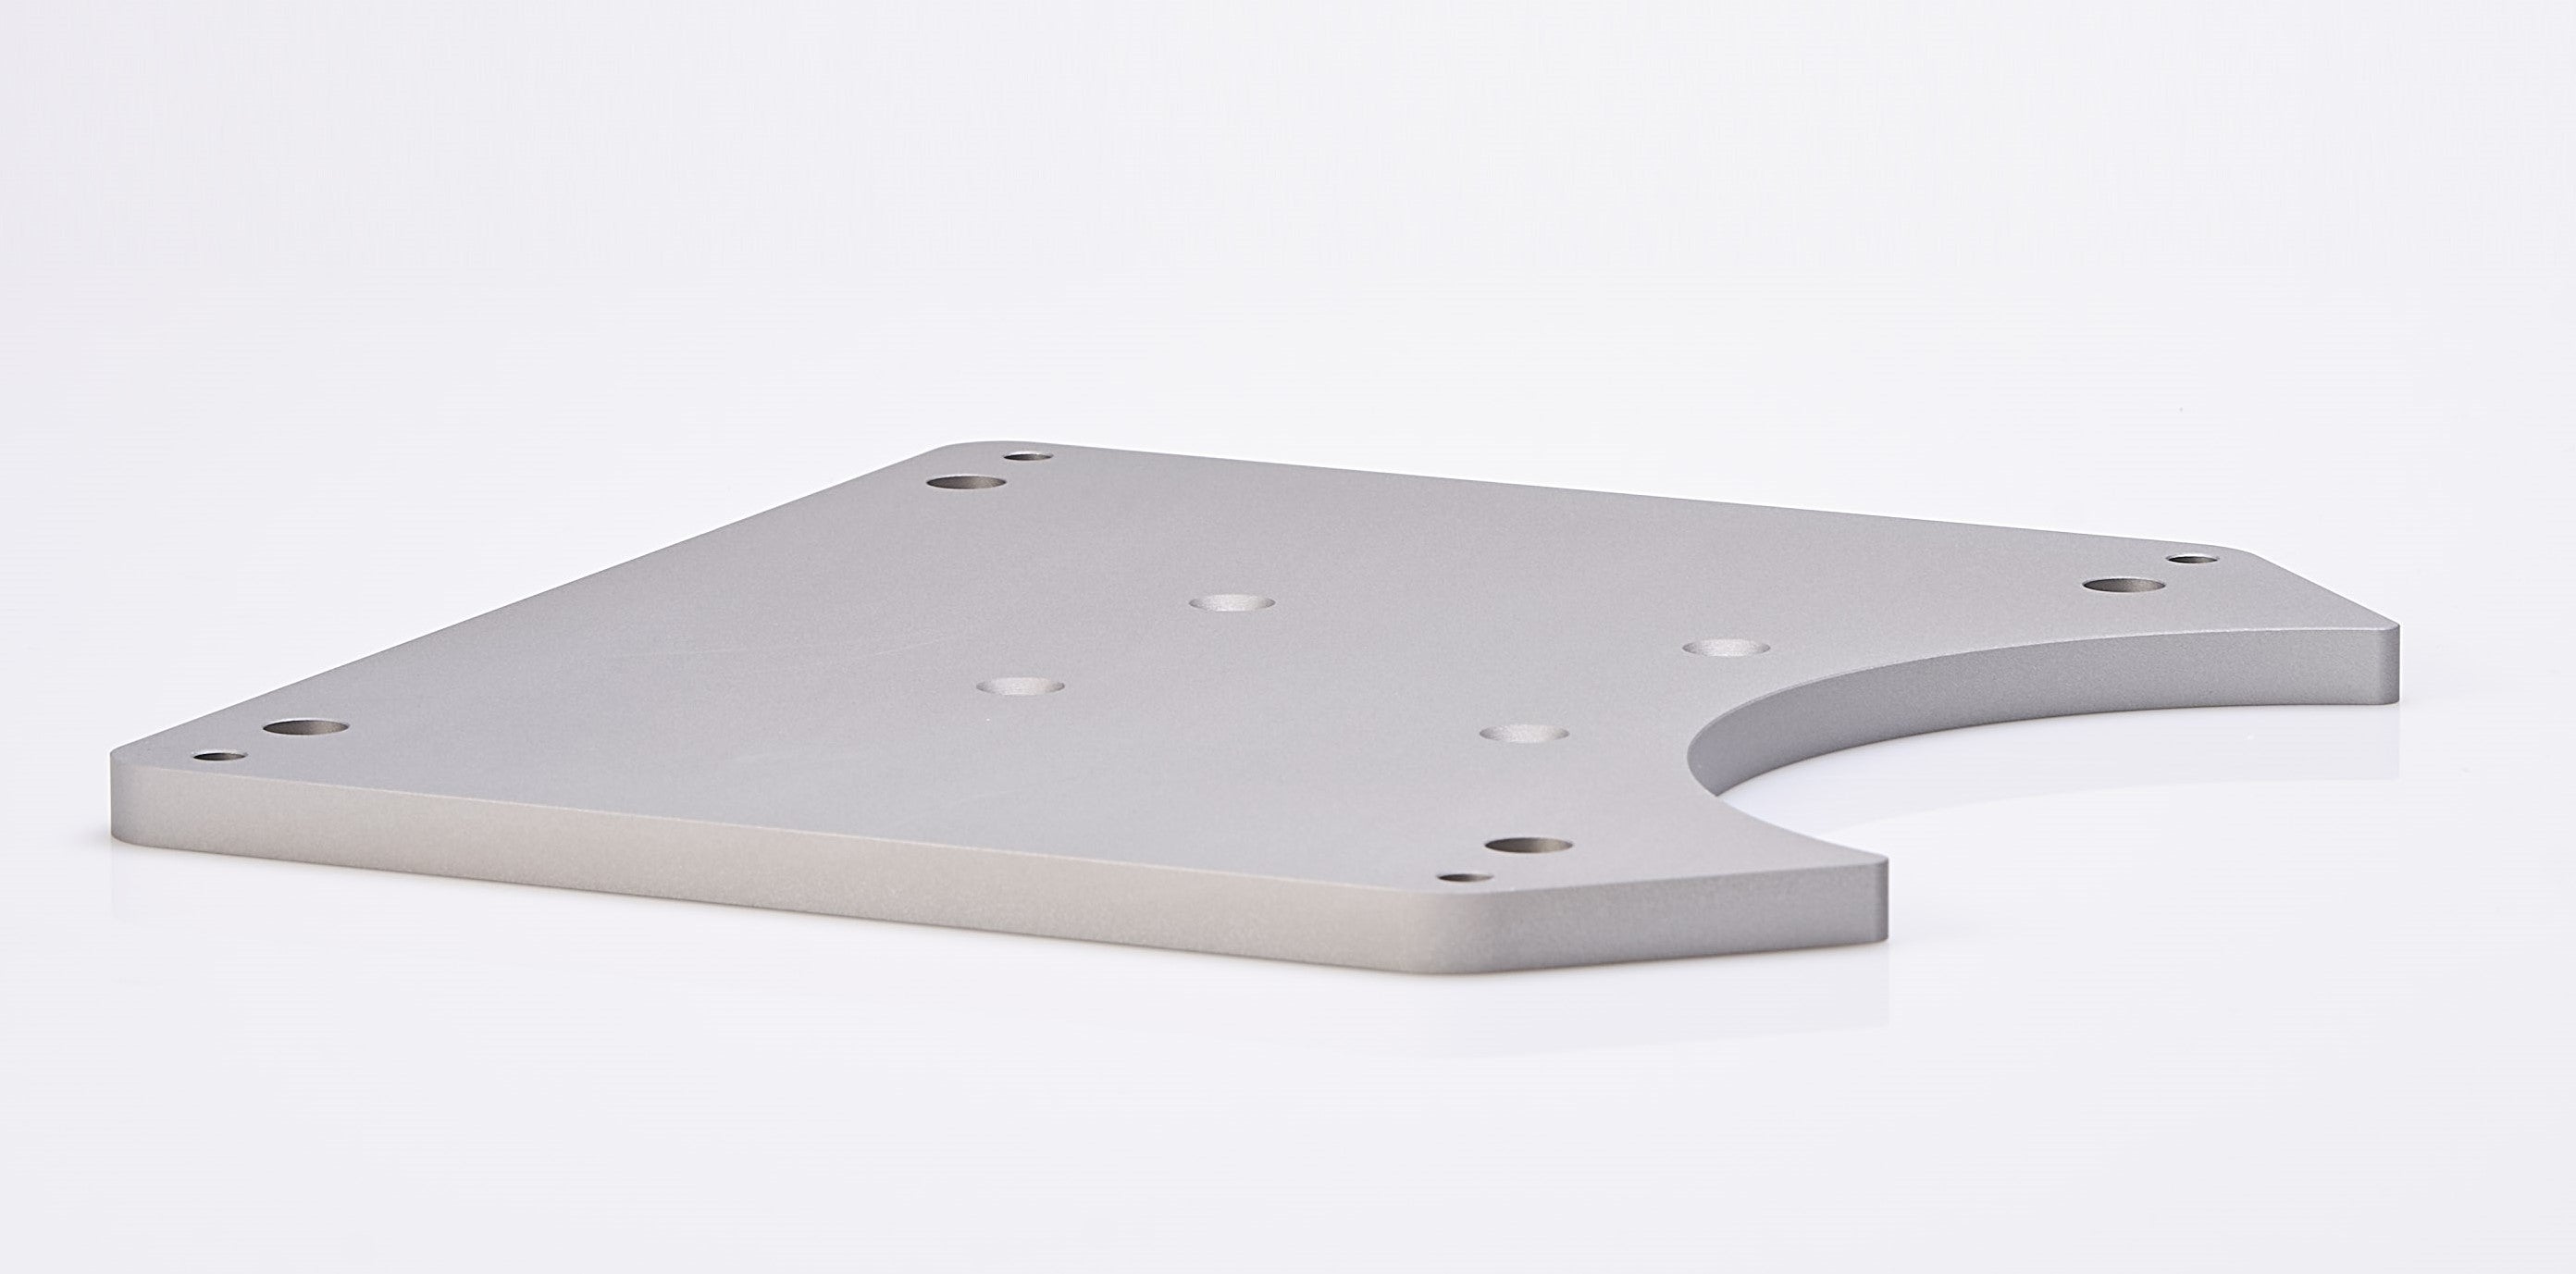 S142/P-B: Mounting plate for attachment to the bottom of the BEAM process spectrometer housing